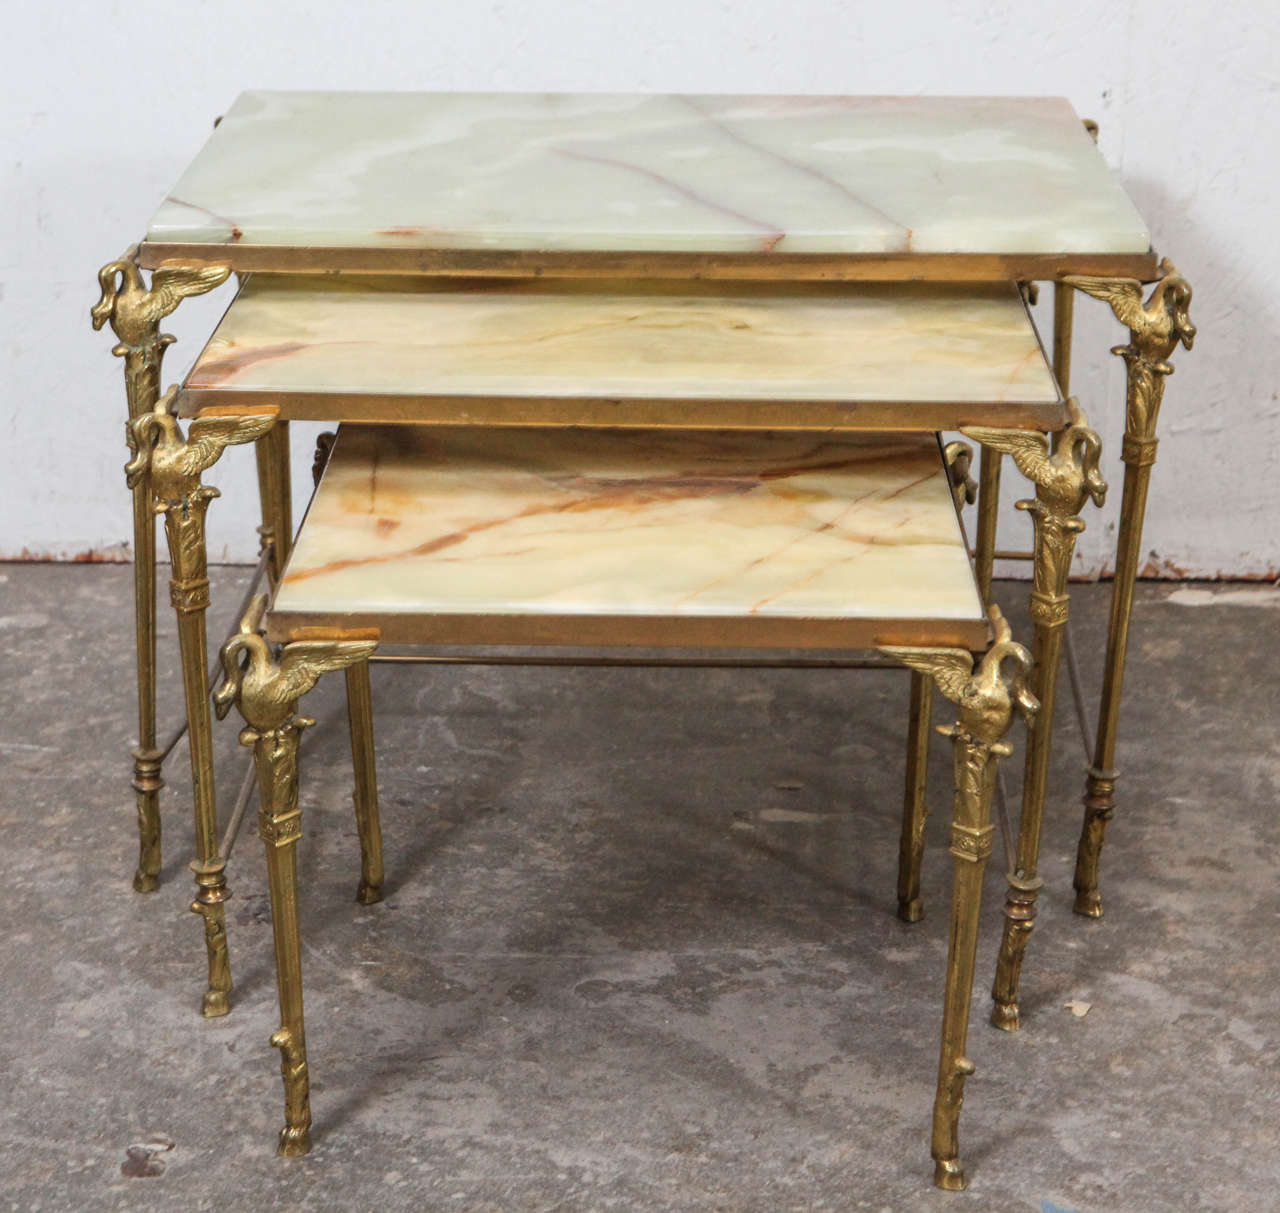 Beautiful brass nesting tables with elegant swan details and rare green and peach toned onyx tops.